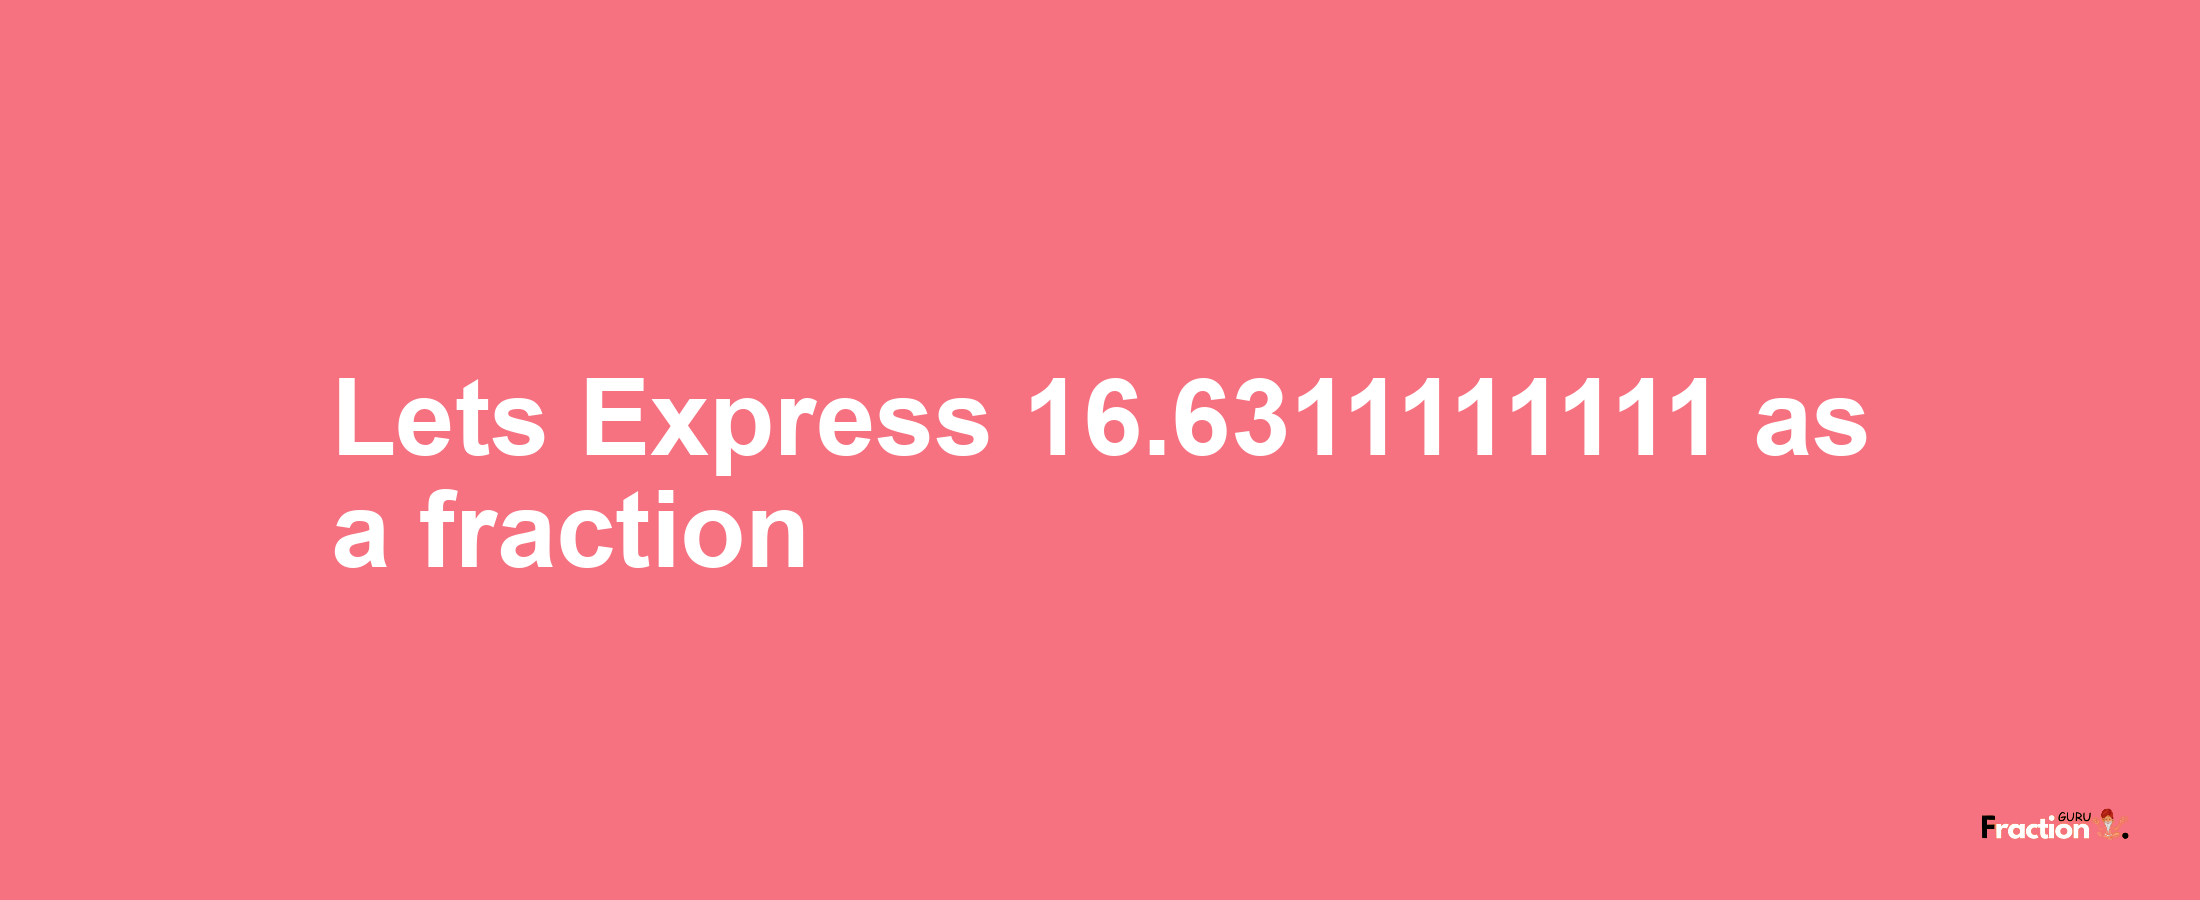 Lets Express 16.6311111111 as afraction